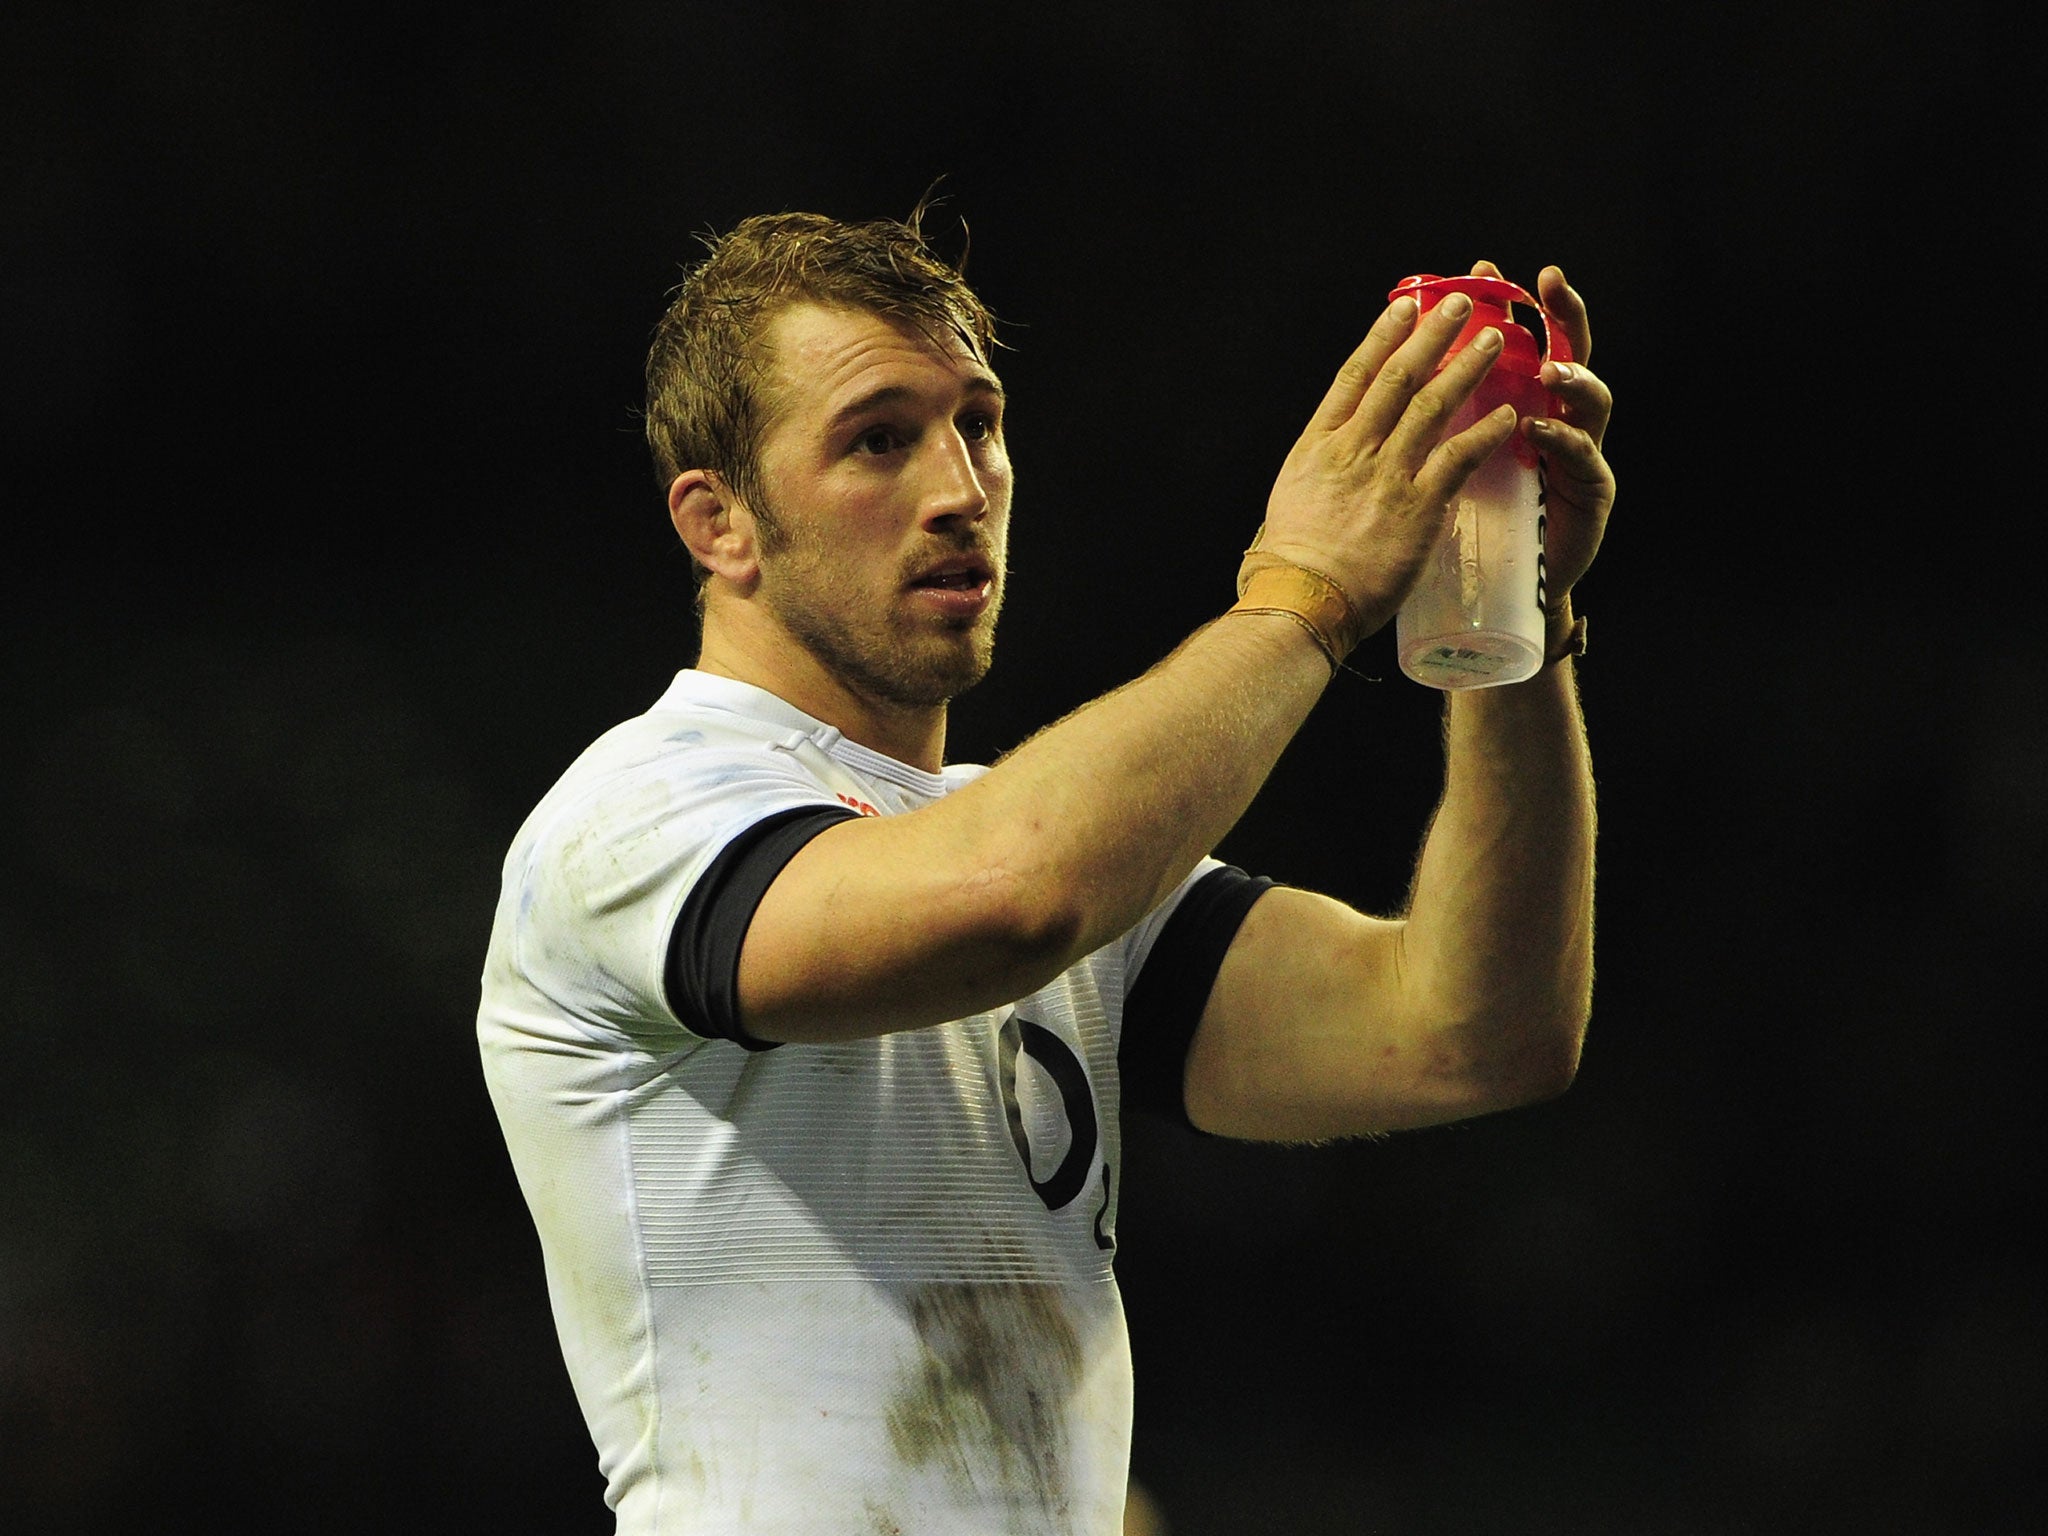 Chris Robshaw, the national
captain